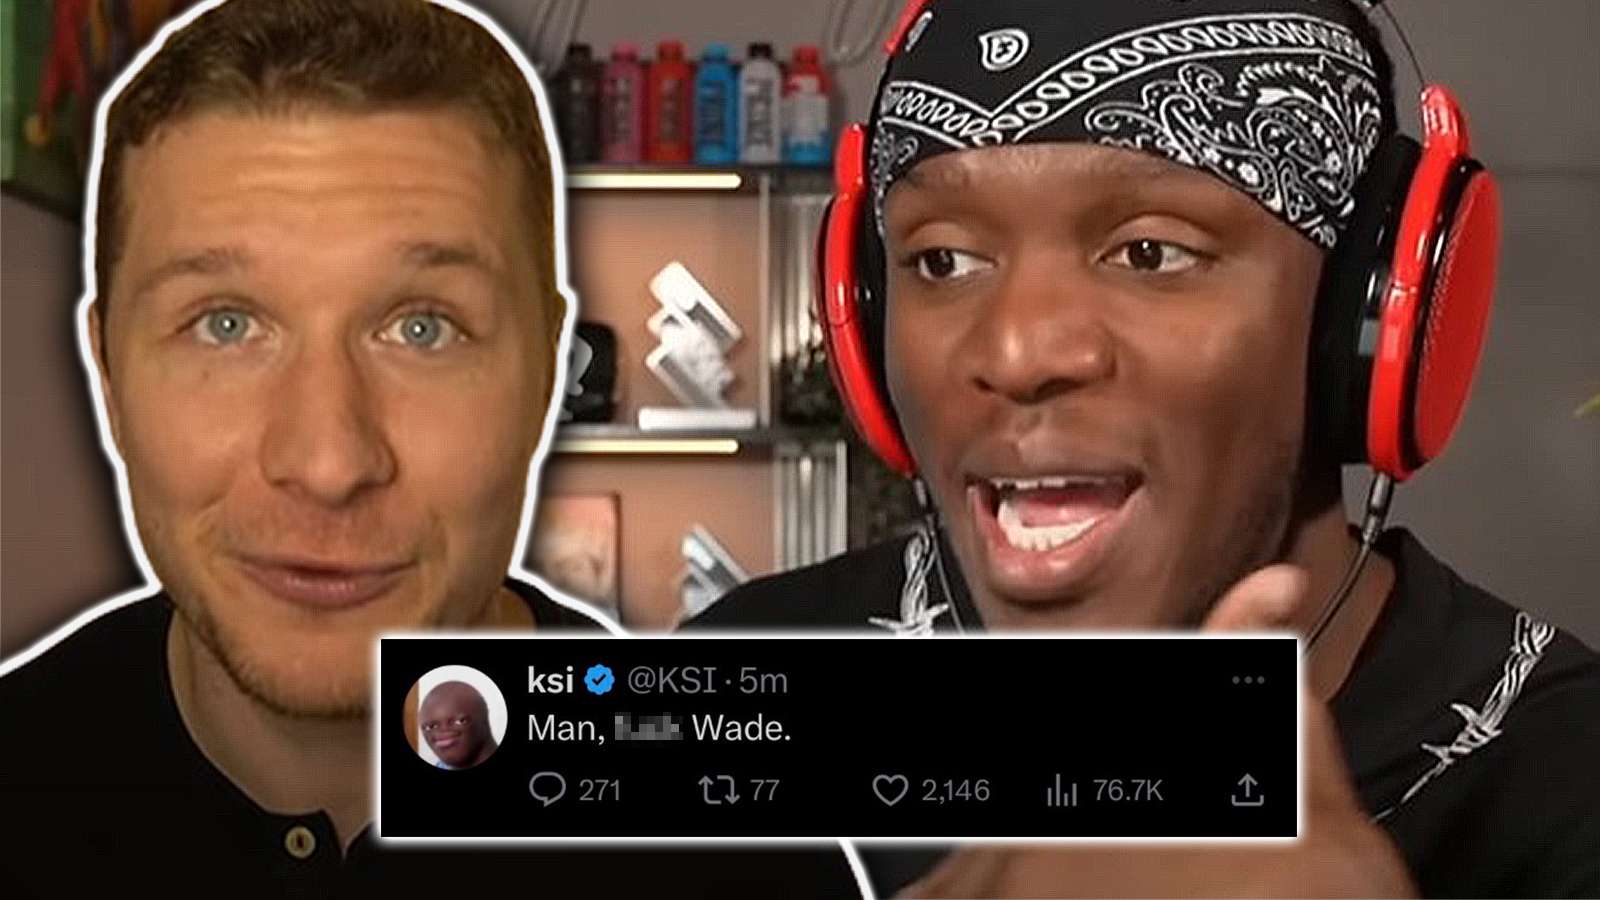 KSI lashes out at wade plem over jake paul tommy fury comments